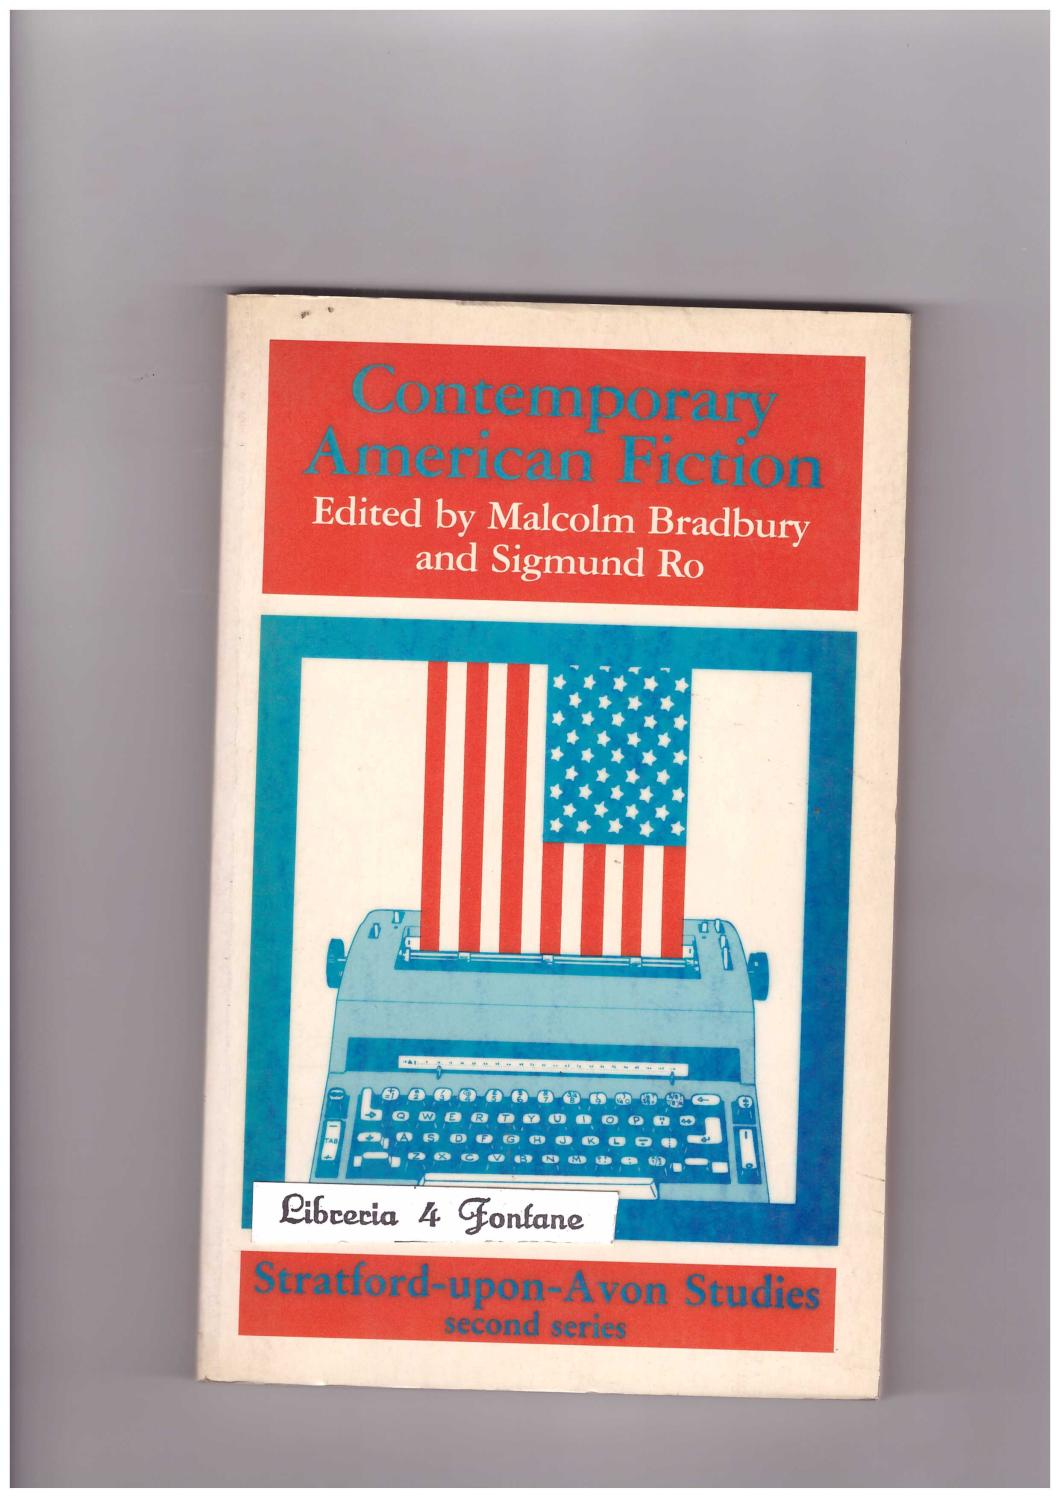 Contemporary American Fiction [Stratford-upon-Avon Studies, Second Series]